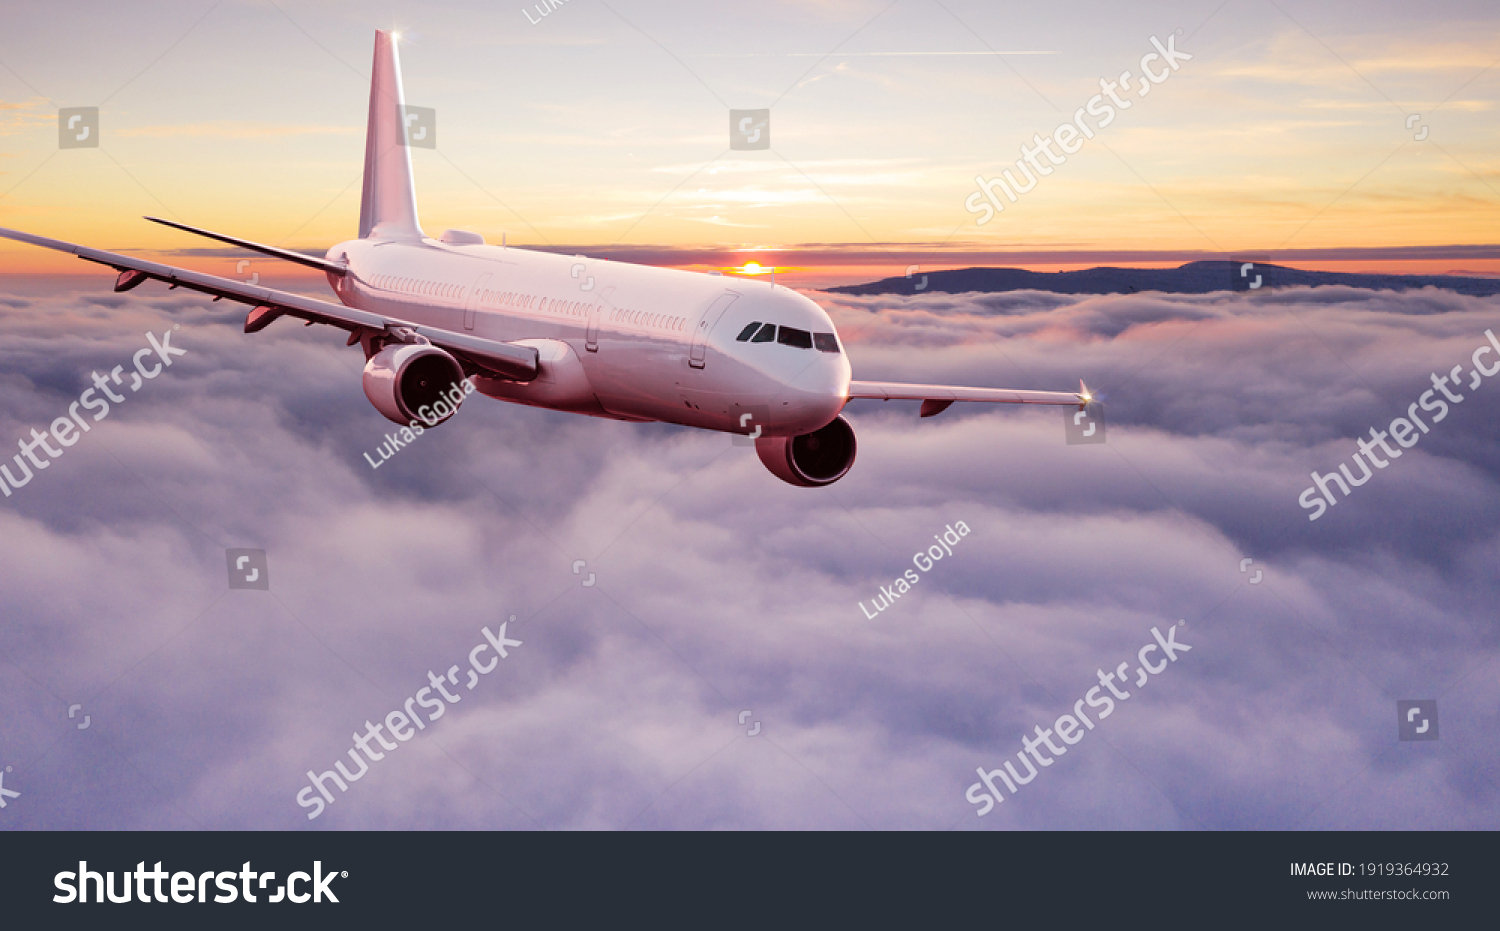 Commercial airplane jetliner flying above dramatic clouds in beautiful light. Travel concept. #1919364932